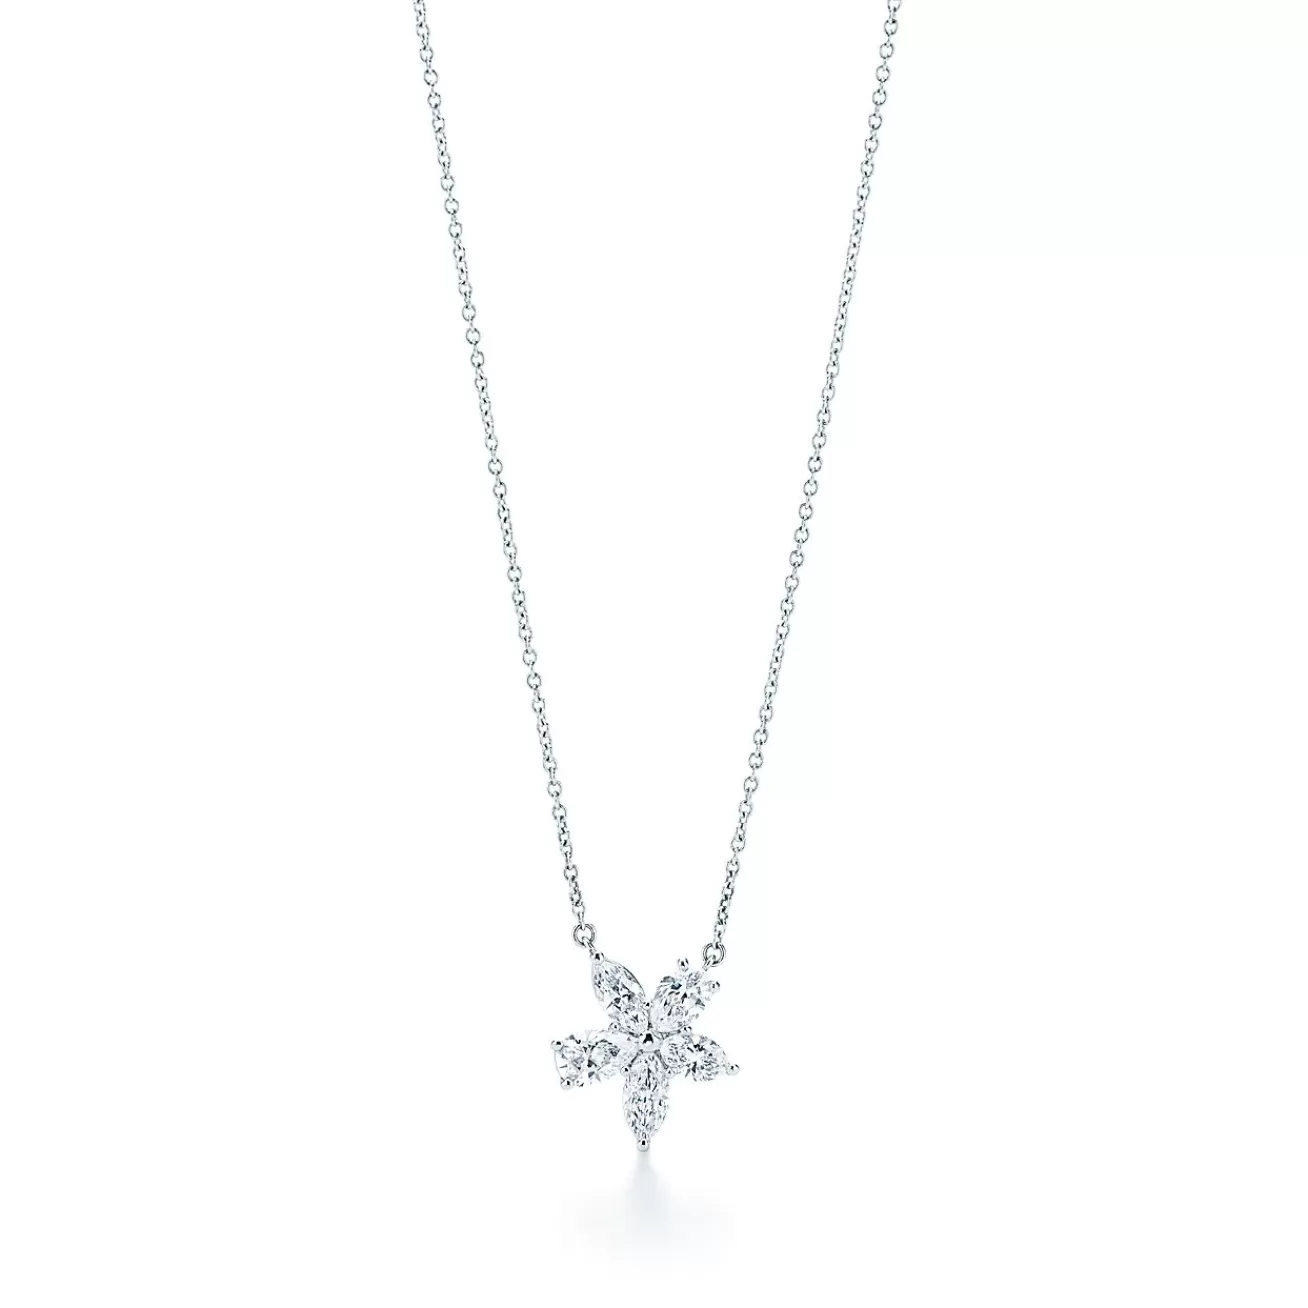 Tiffany & Co. Tiffany Victoria® mixed cluster pendant in platinum with diamonds, large. | ^ Necklaces & Pendants | Platinum Jewelry